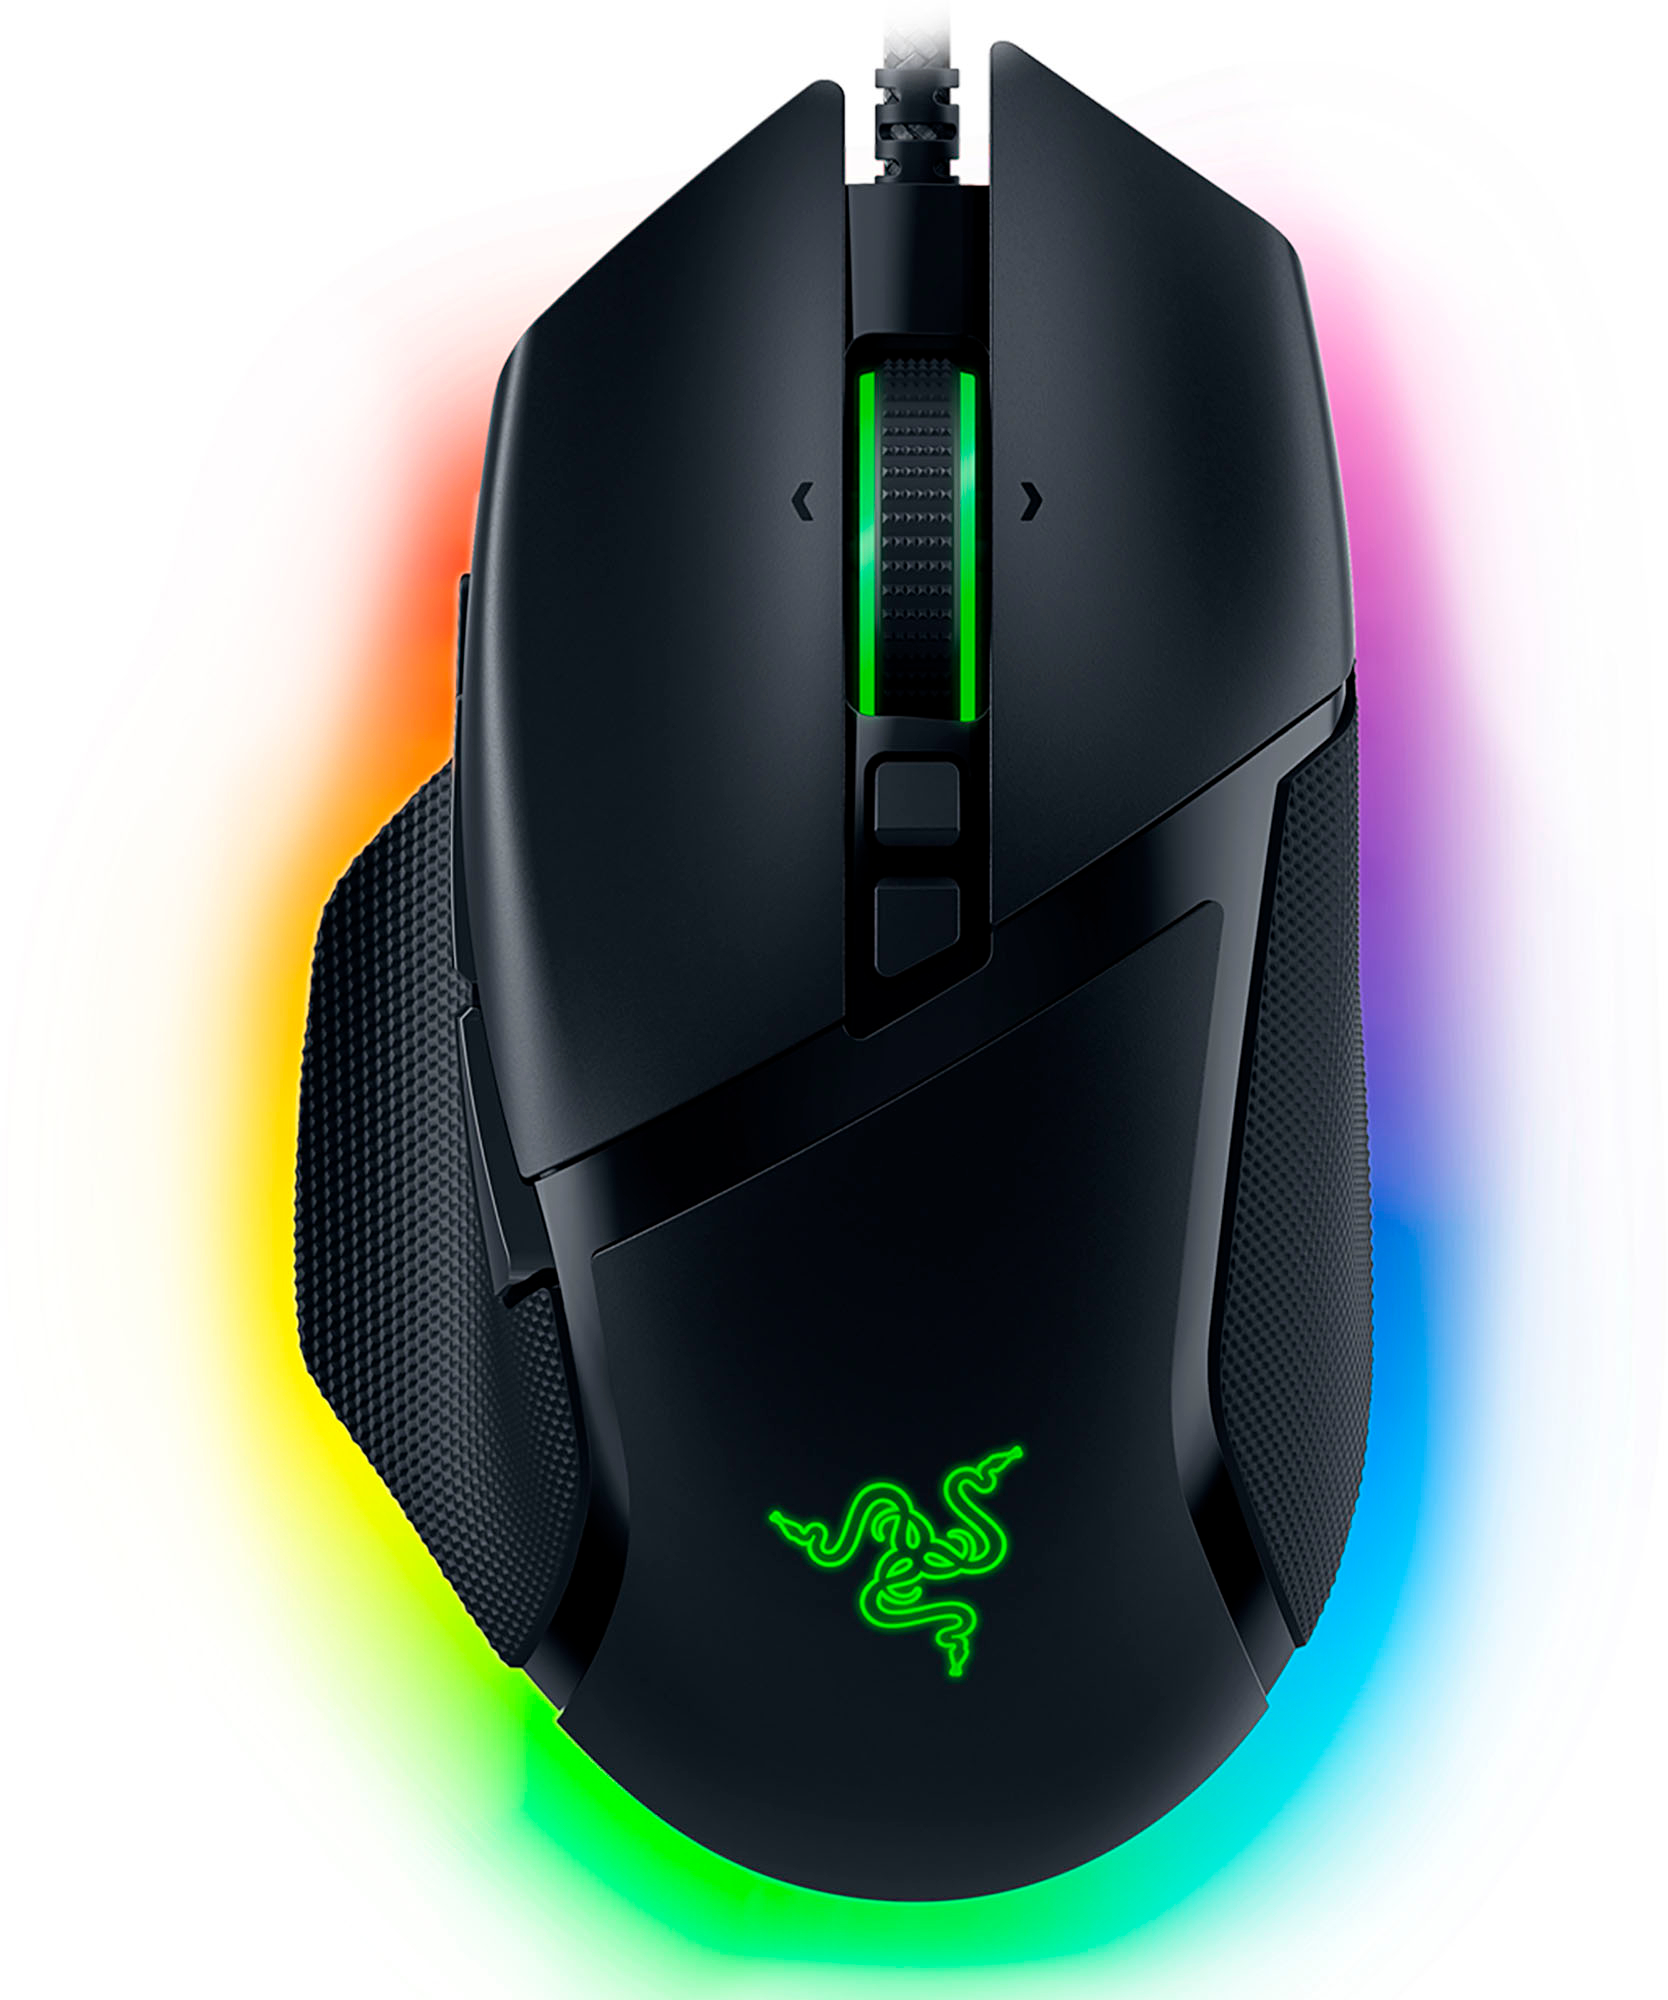 Daily Deals: Razer Mouse with $50 Steam Card, Wolfenstein for $40, $99 3DS  - IGN